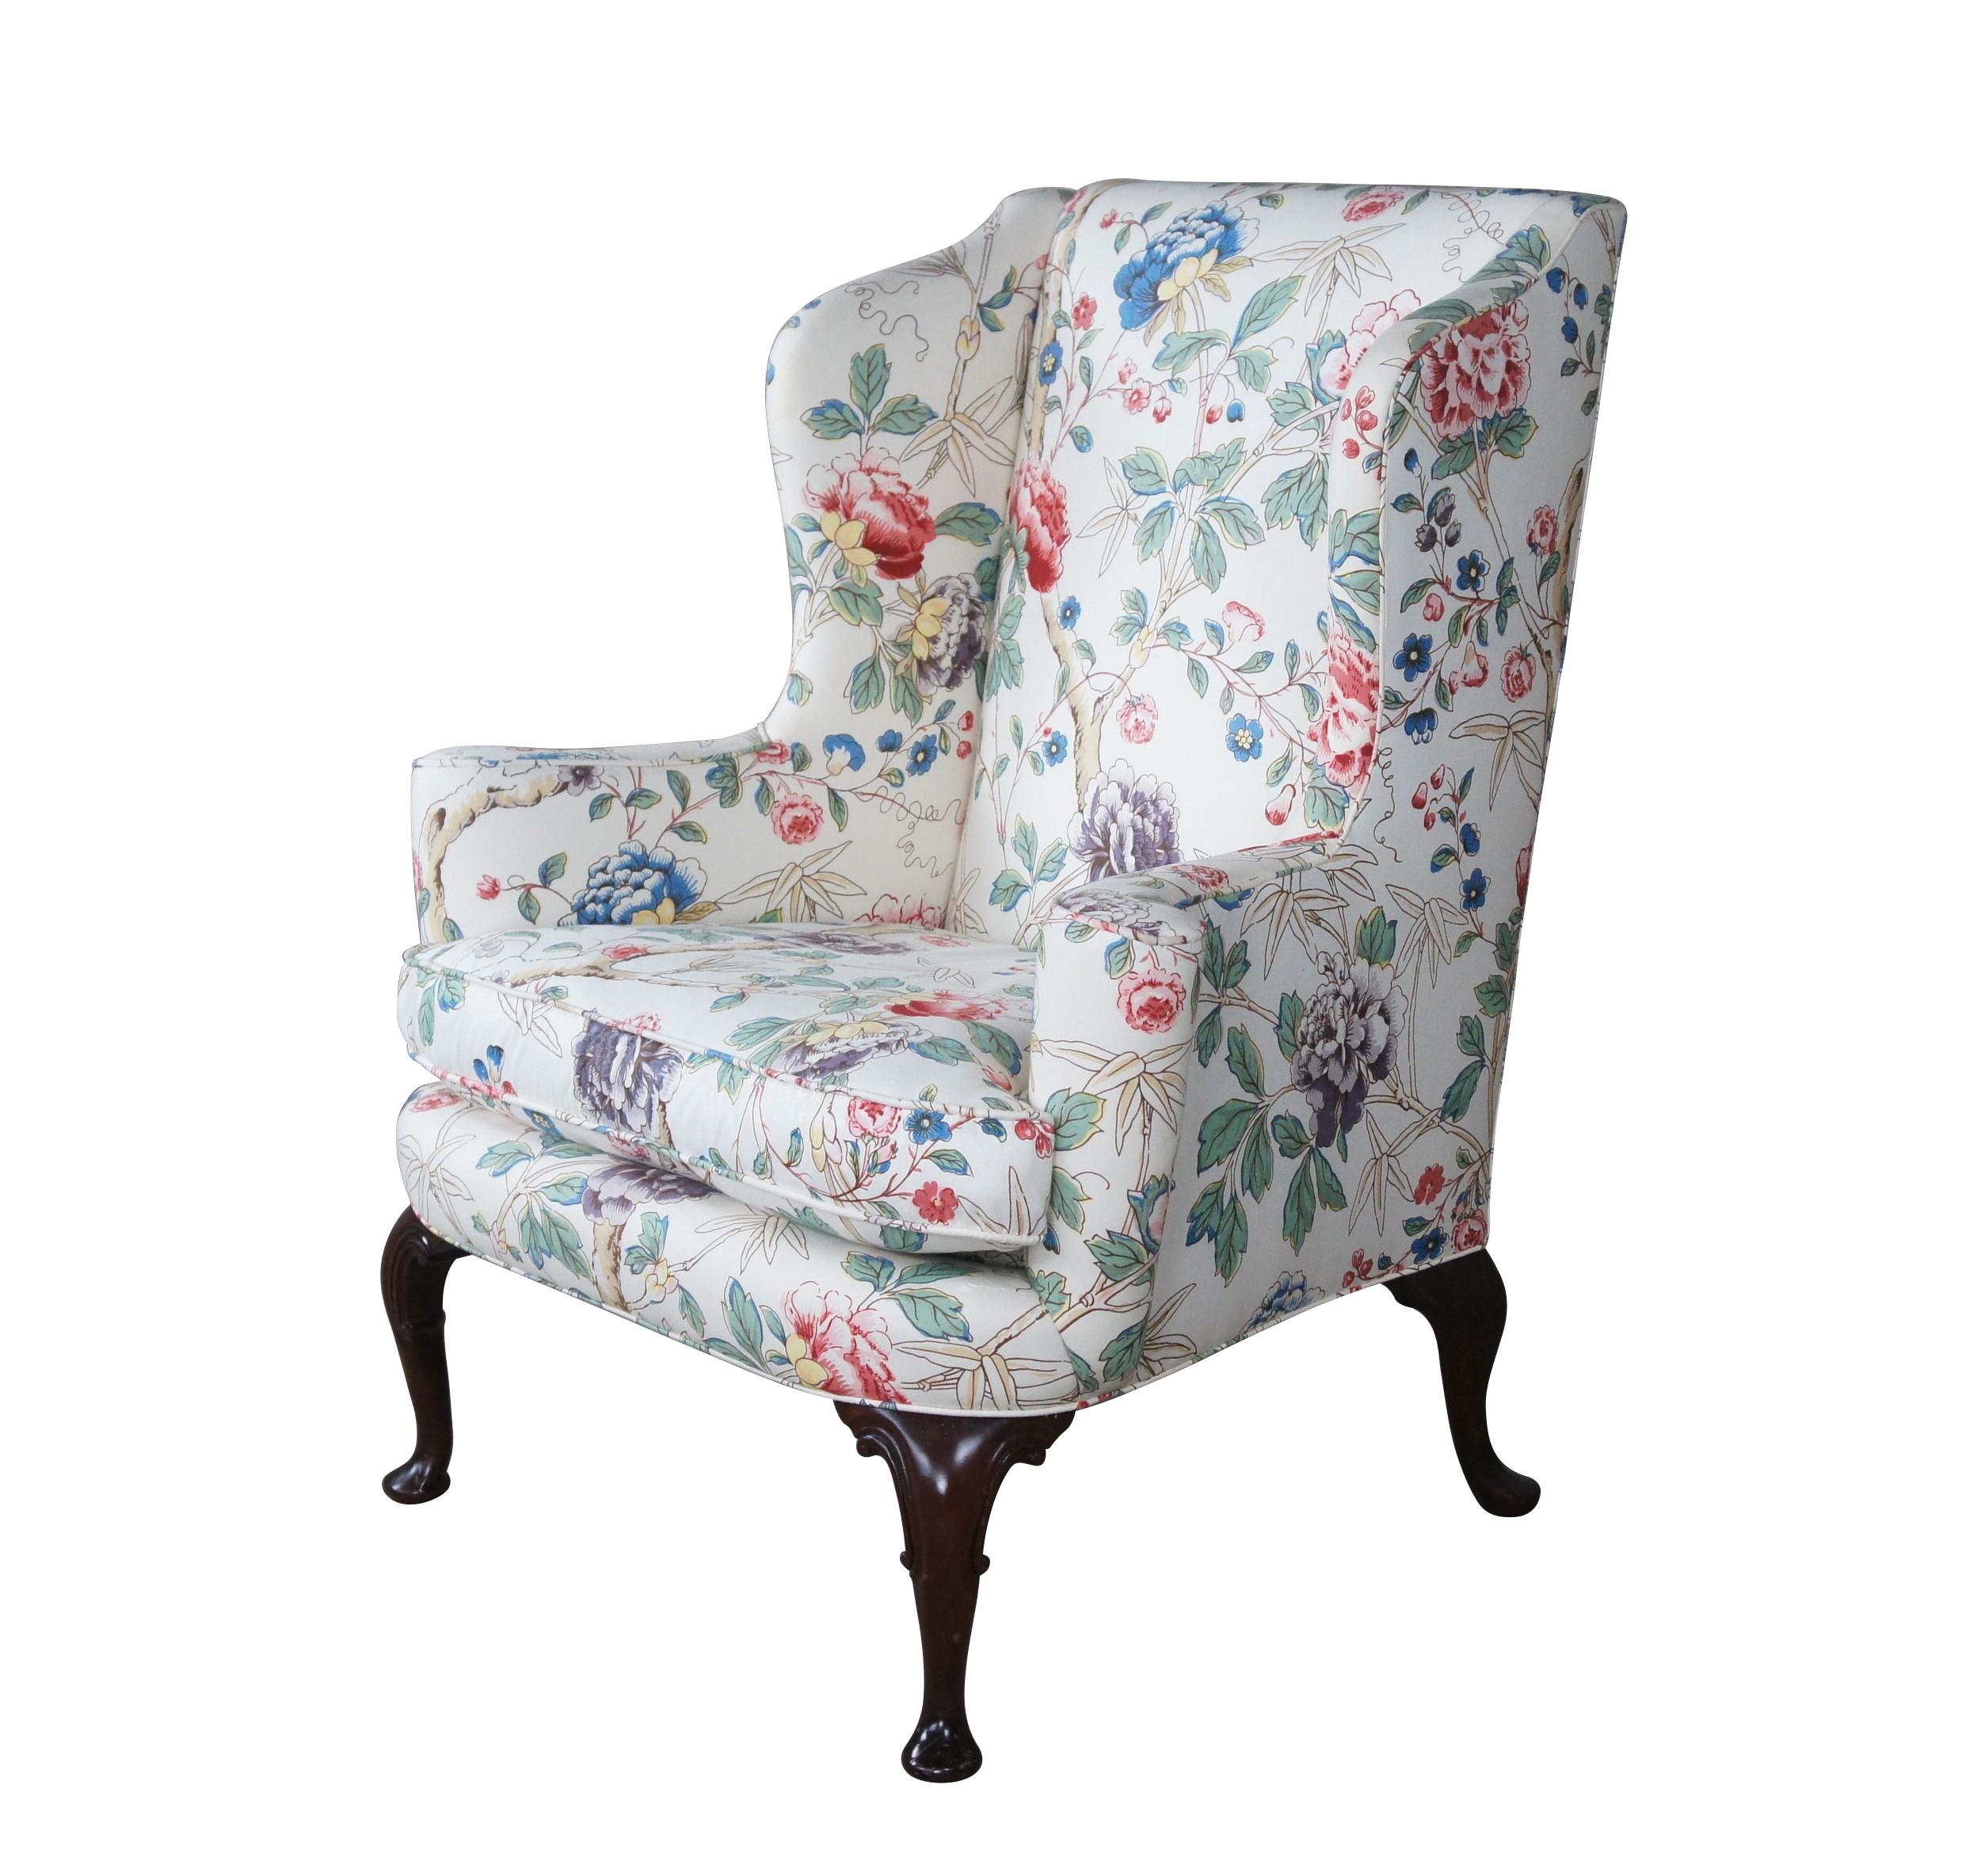 A beautiful Queen Anne style wing chair by Biggs Furniture, circa last half 20th century. Made from mahogany with a highback and scrolled and flared arms. The chair is supported by downswept cabriole legs leading to pad feet. The floral fabric is